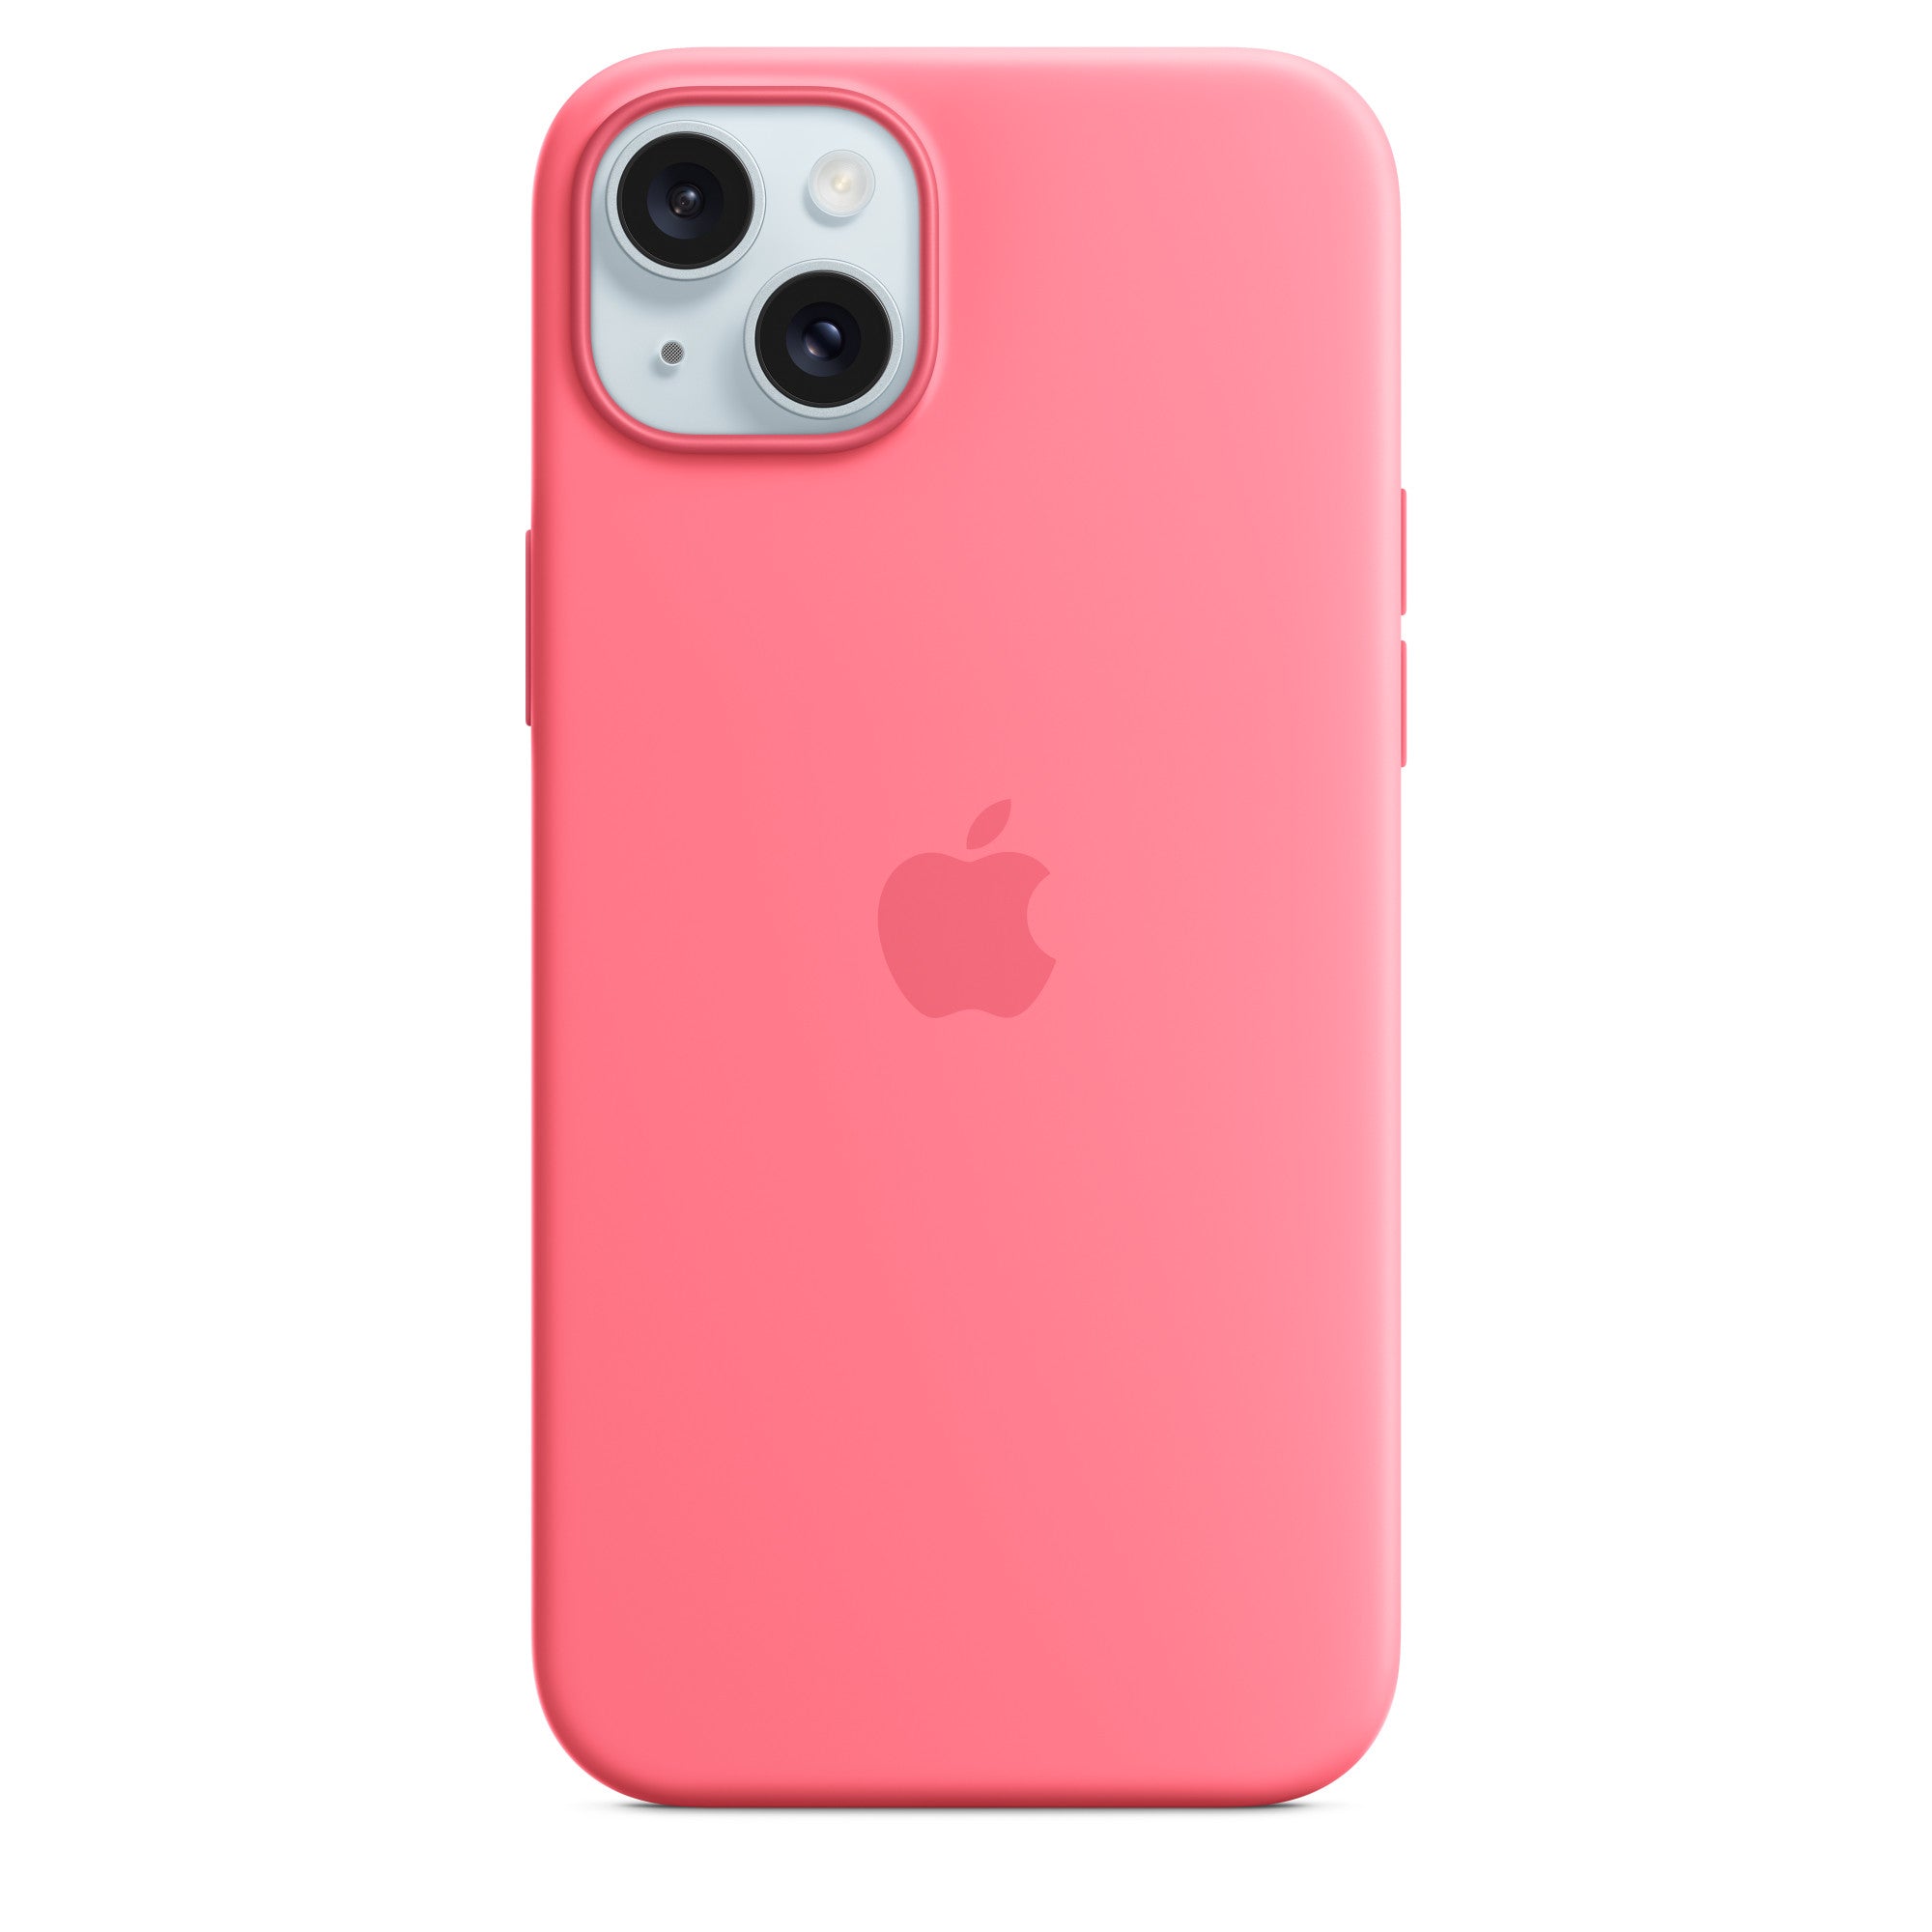 iPhone 12 / 12 Pro Silicone Case with Wireless Charging Support